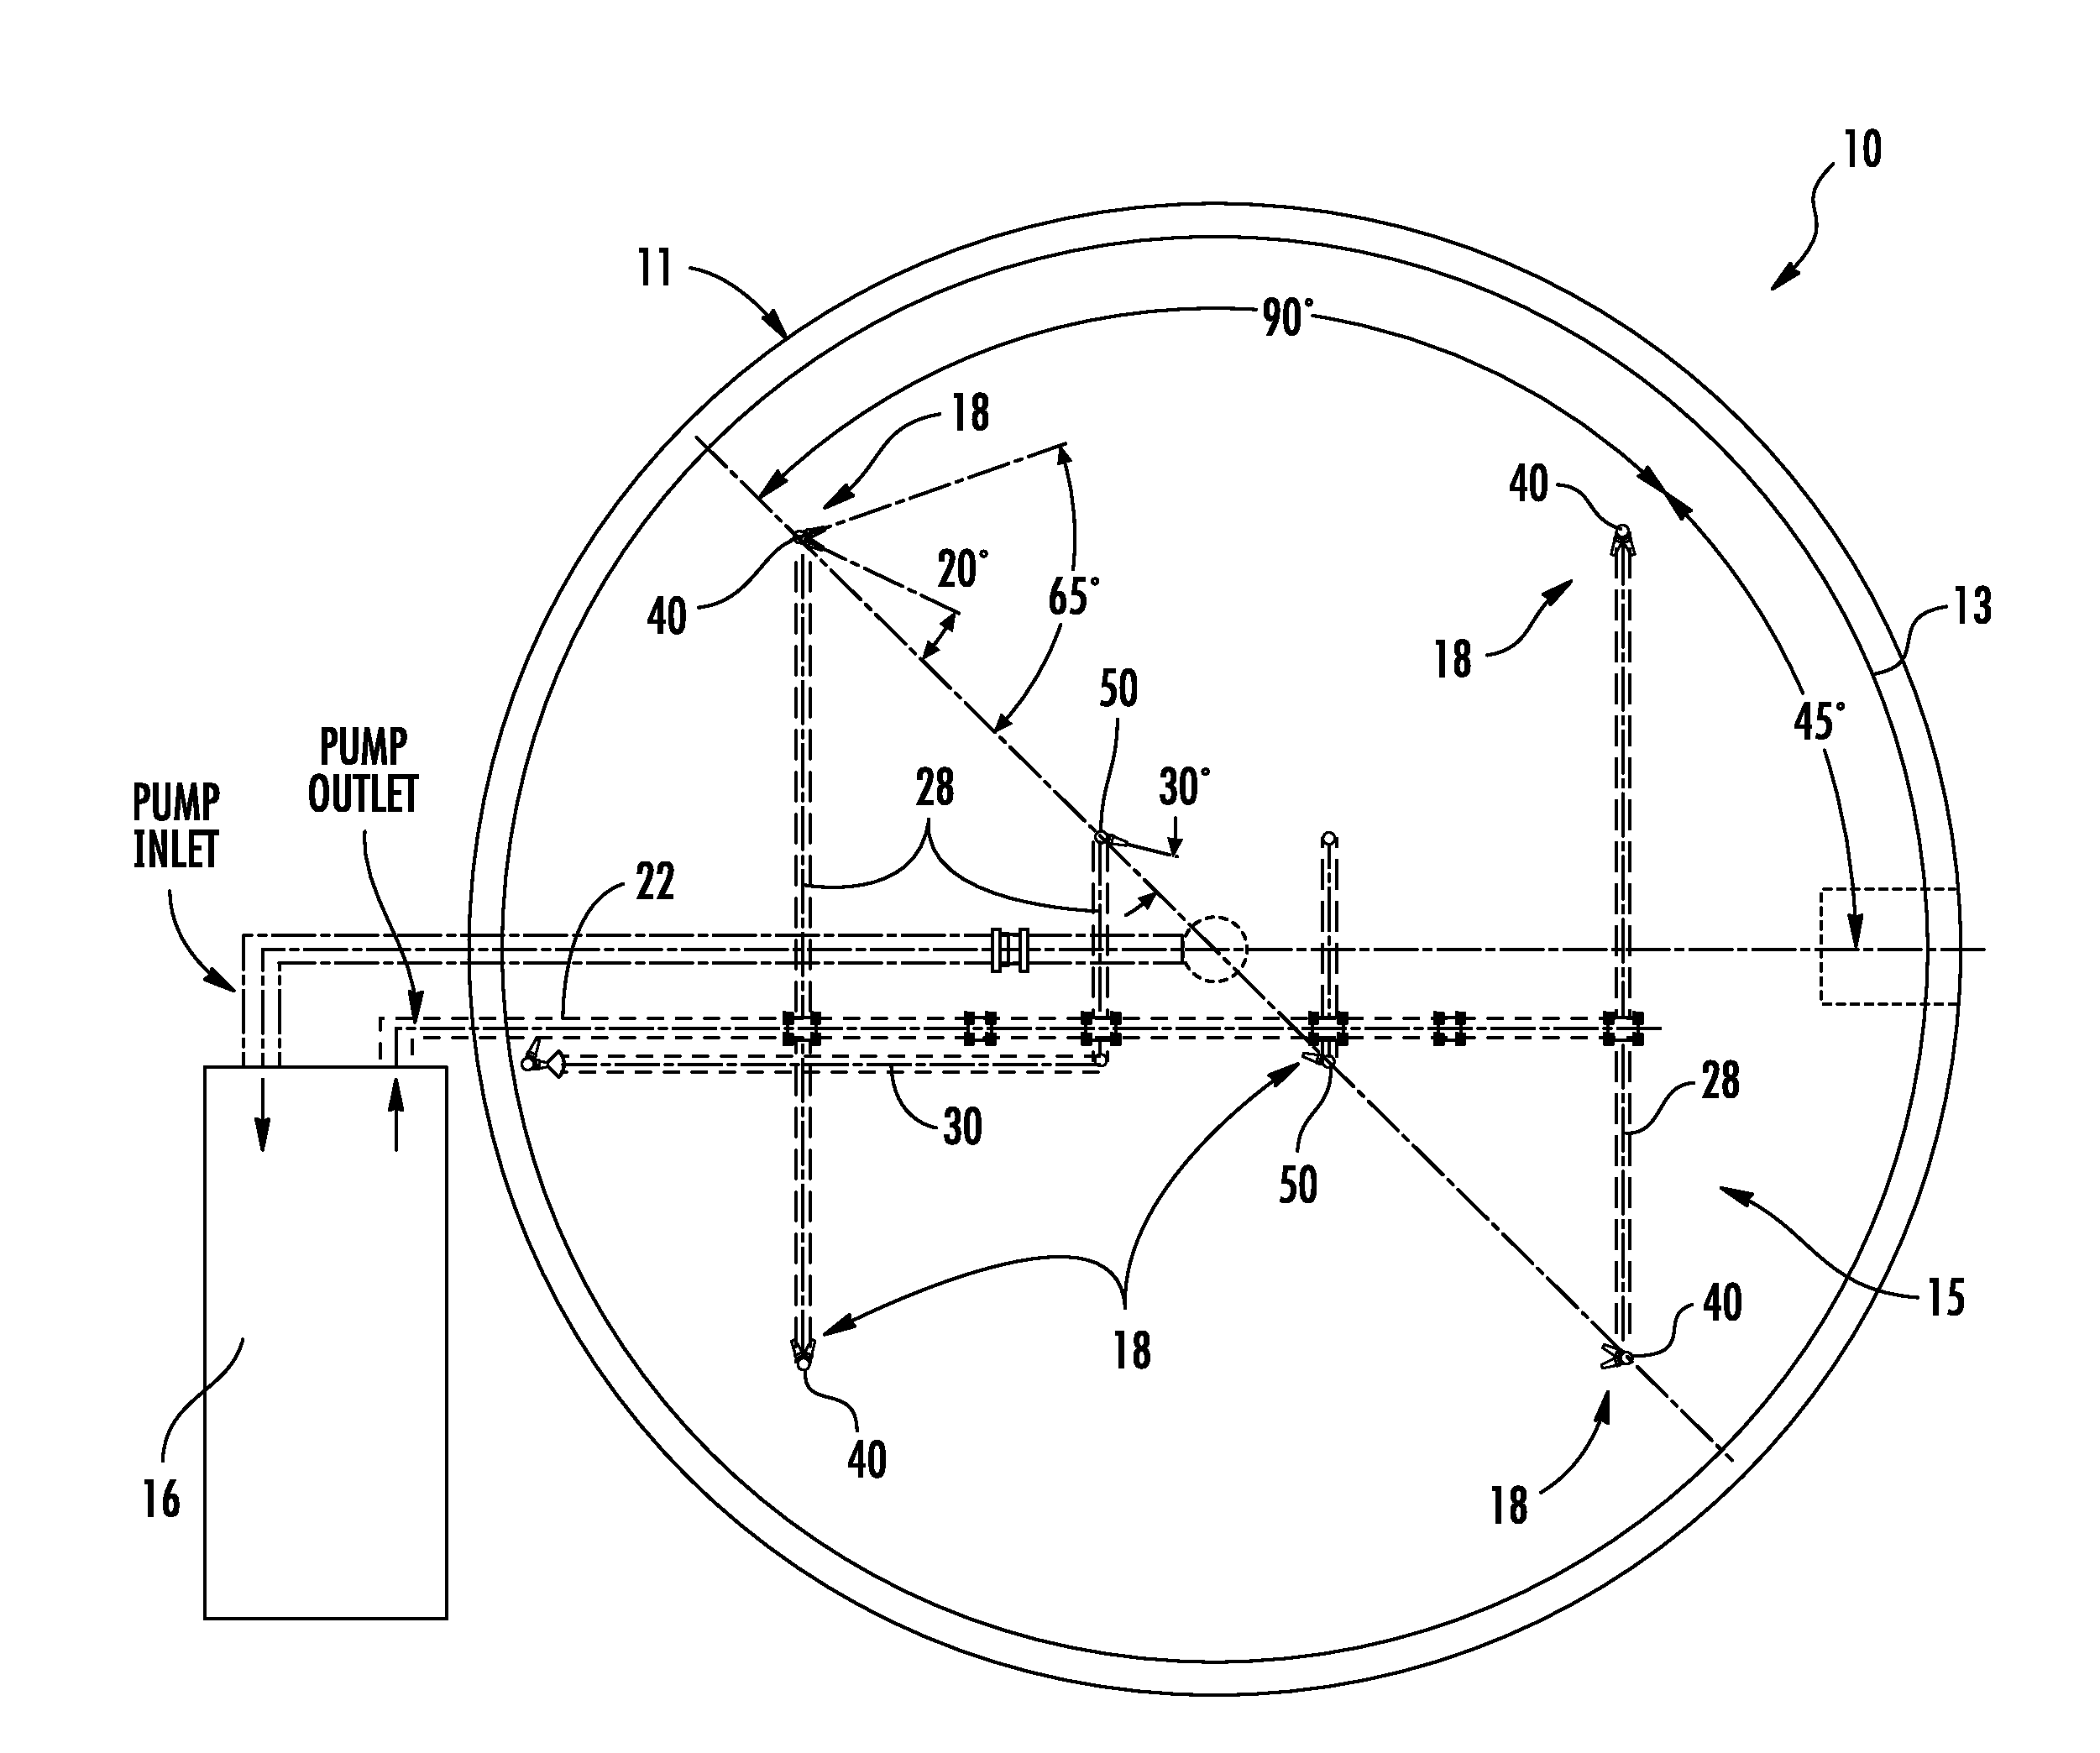 System Having Foam Busting Nozzle and Sub-Surface Mixing Nozzle